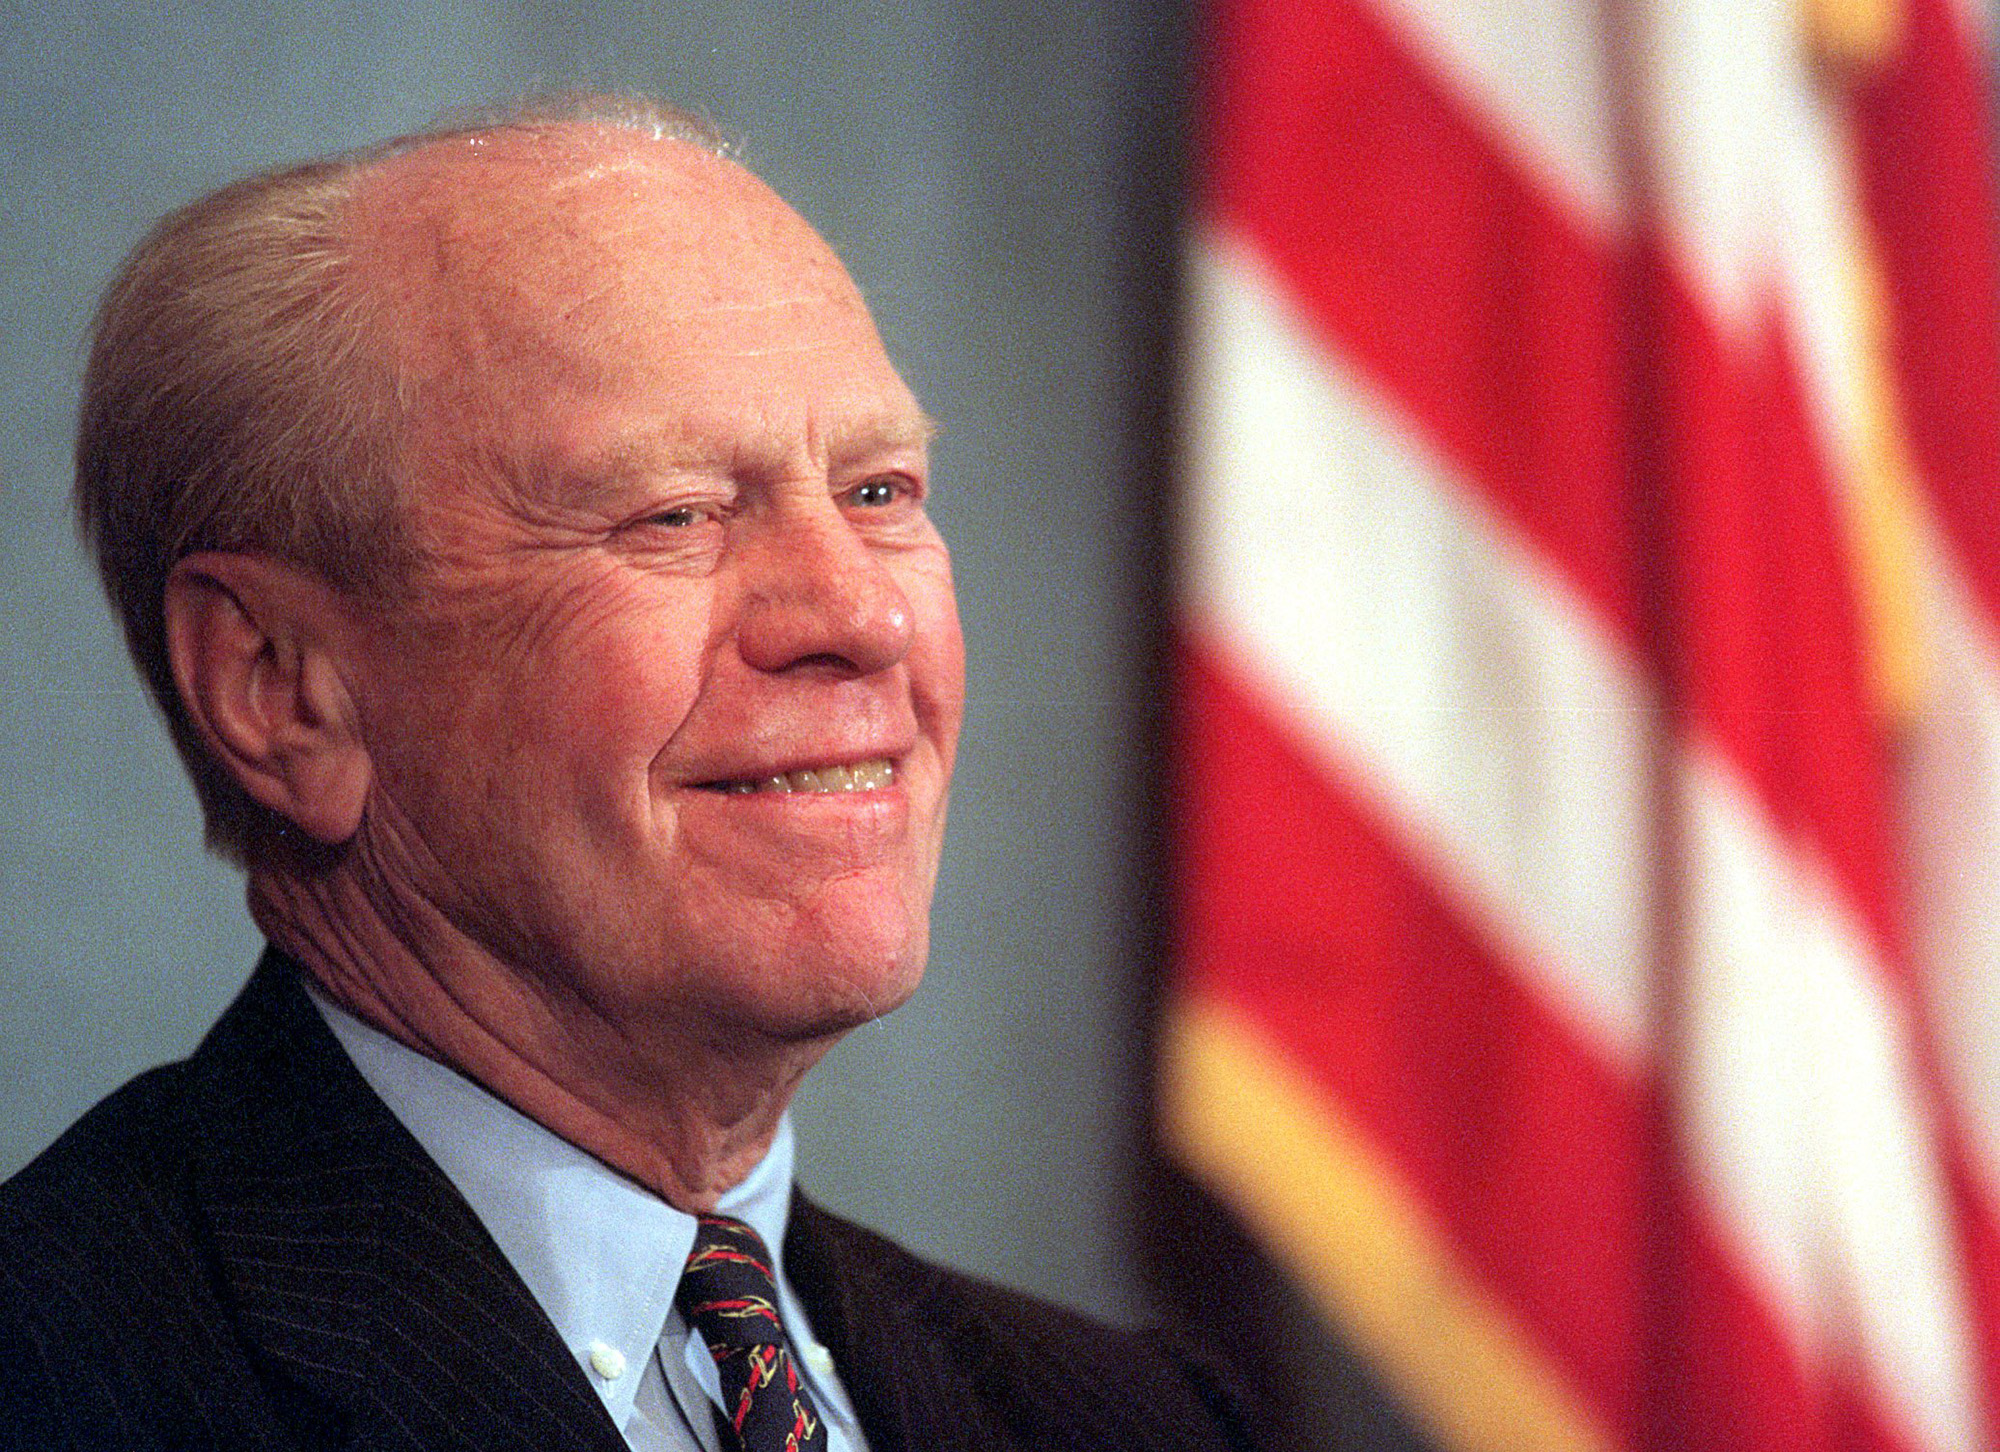 KRT NEWS STORY SLUGGED: FORD KRT PHOTOGRAPH BY KHUE BUI (KRT304-June 2) Former President Gerald R. Ford listens at the National Press Club in Washington, D.C., prior to addressing the audience on June 1, 1998. (KRT) PL, KD (hew214.47) 1998 (COLOR)